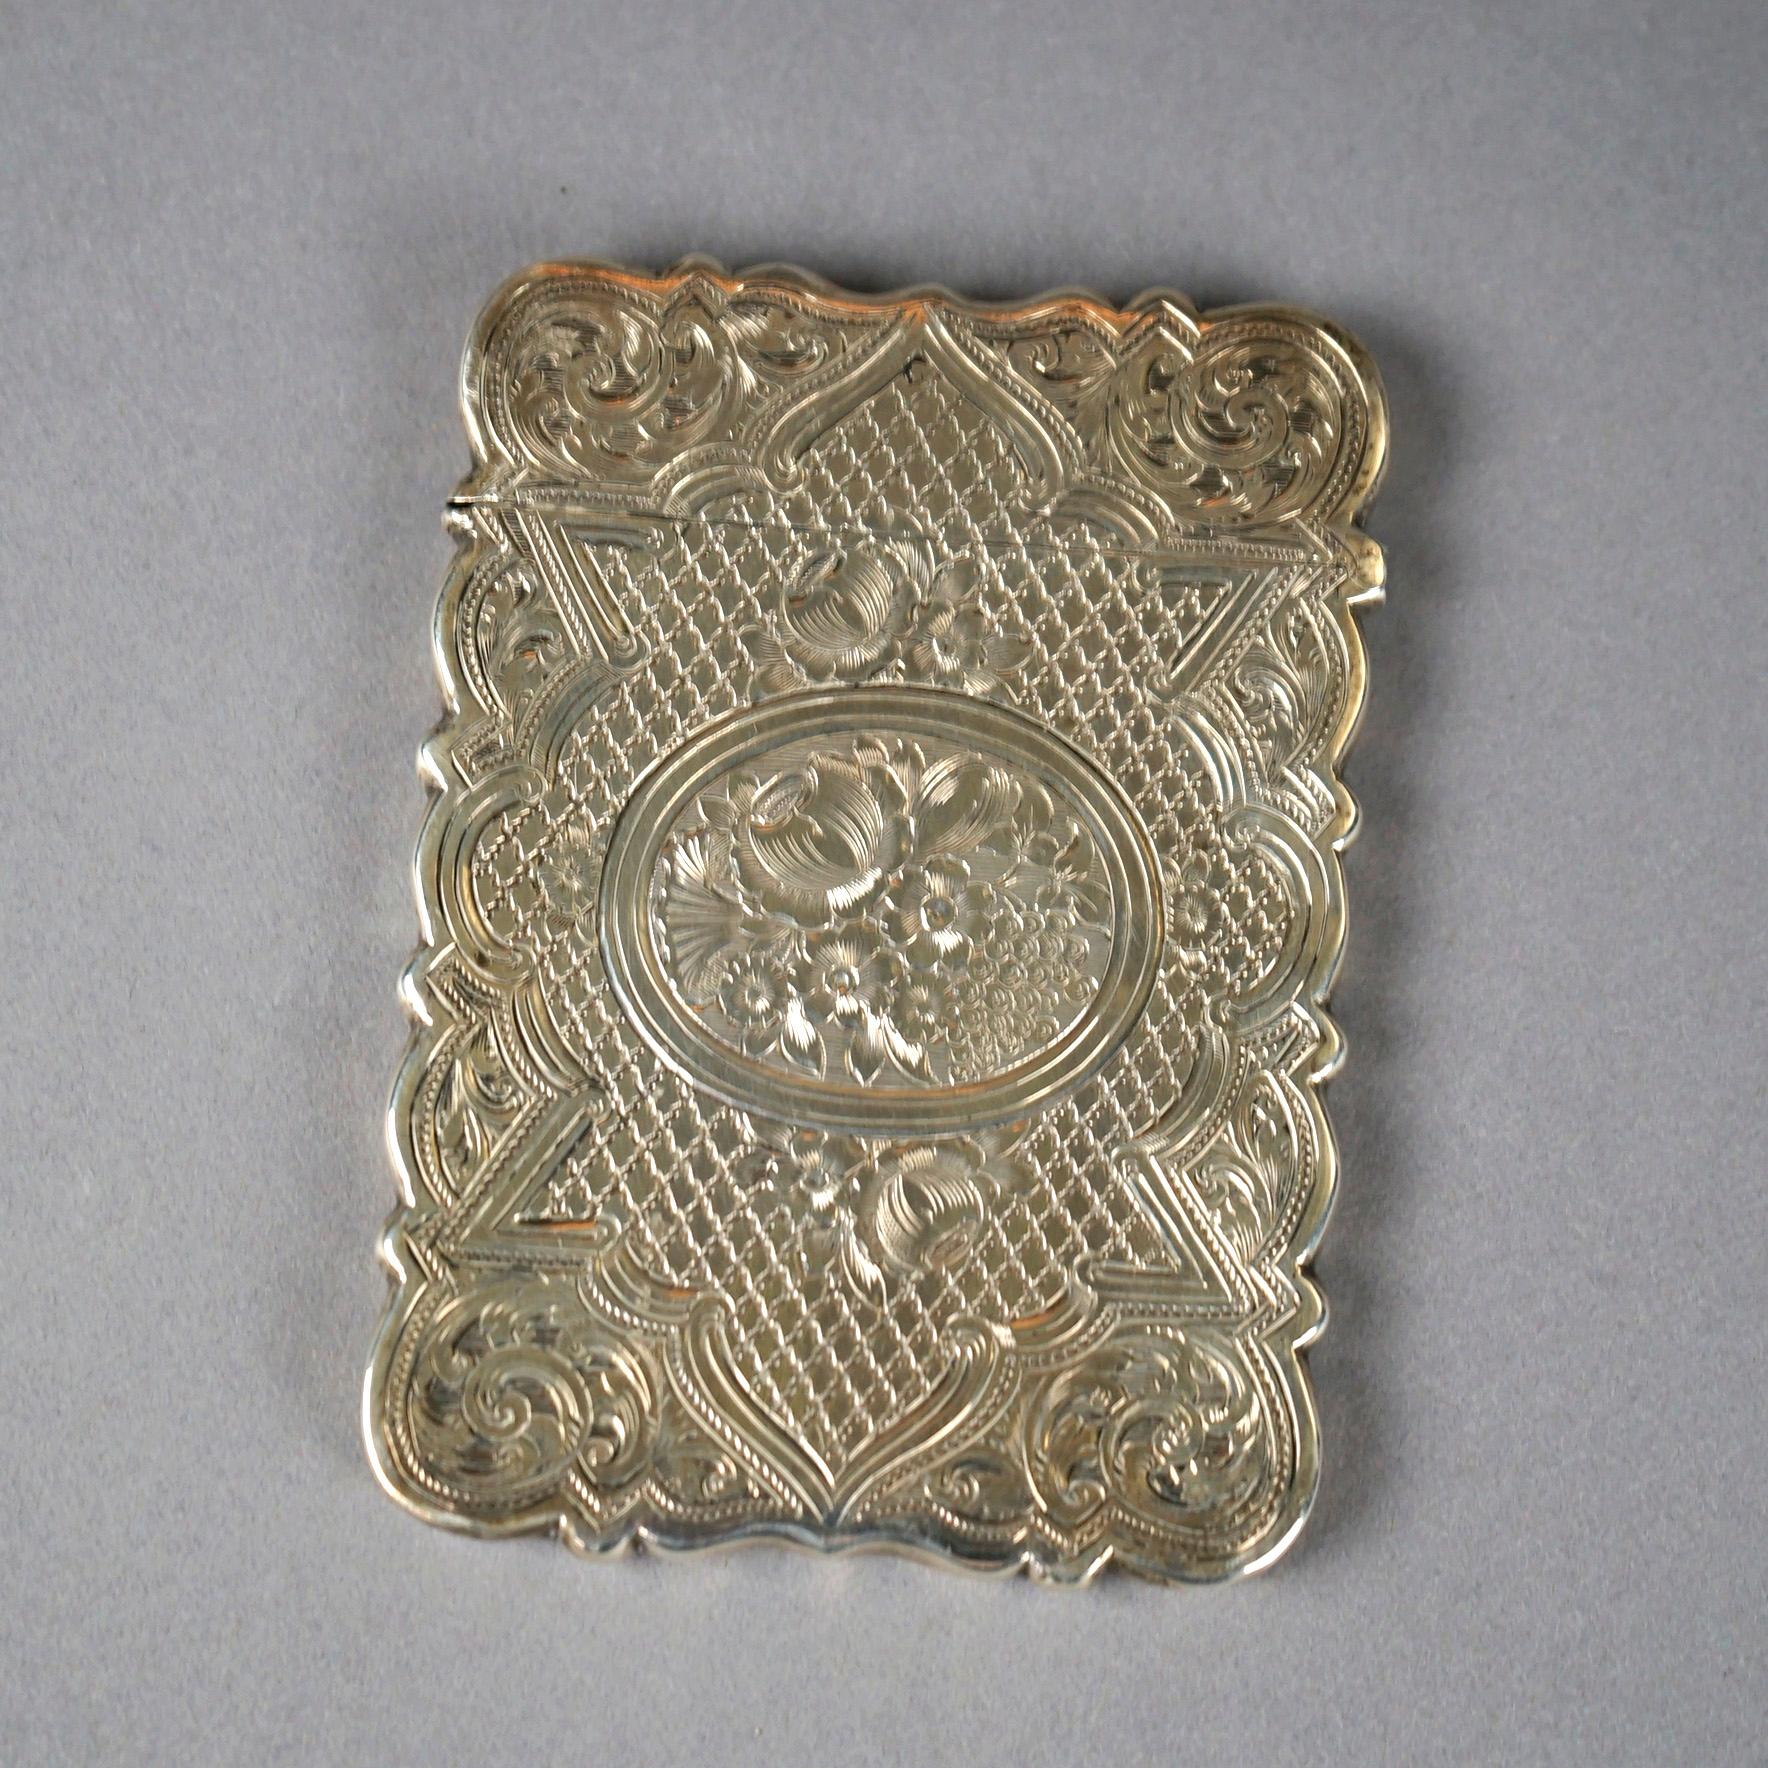 An antique Victorian calling card case offers sterling silver construction with foliate and scroll elements, c1890, 1,85 toz

Measures- 3.75''H x .25''W x 2.75''D.